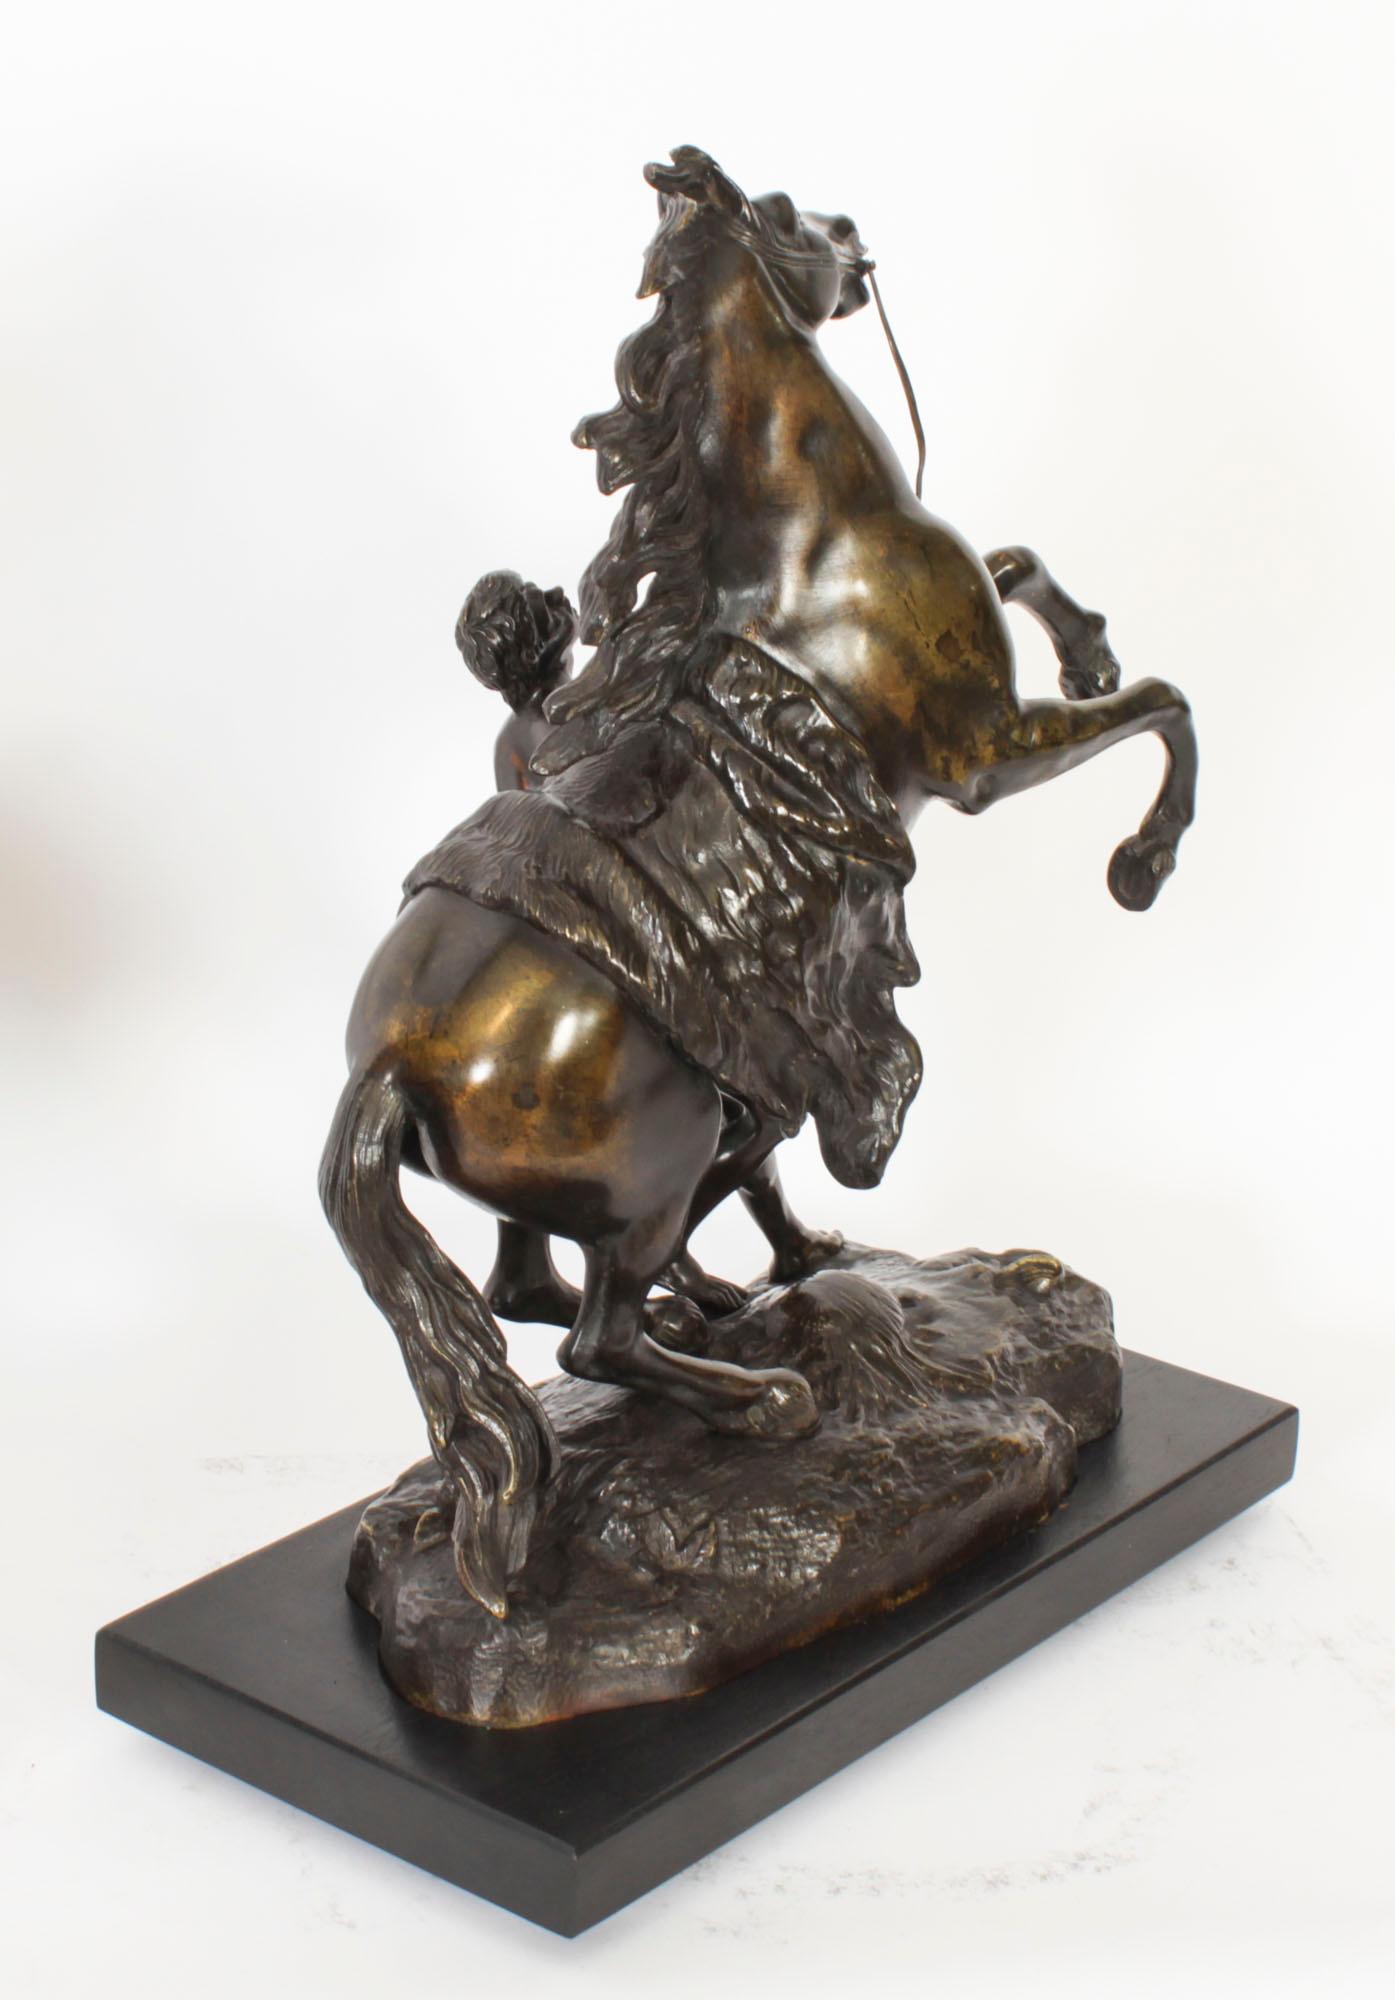 Antique Pair of French Bronze Marly Horses Sculptures by Cousteau 19th Century For Sale 11